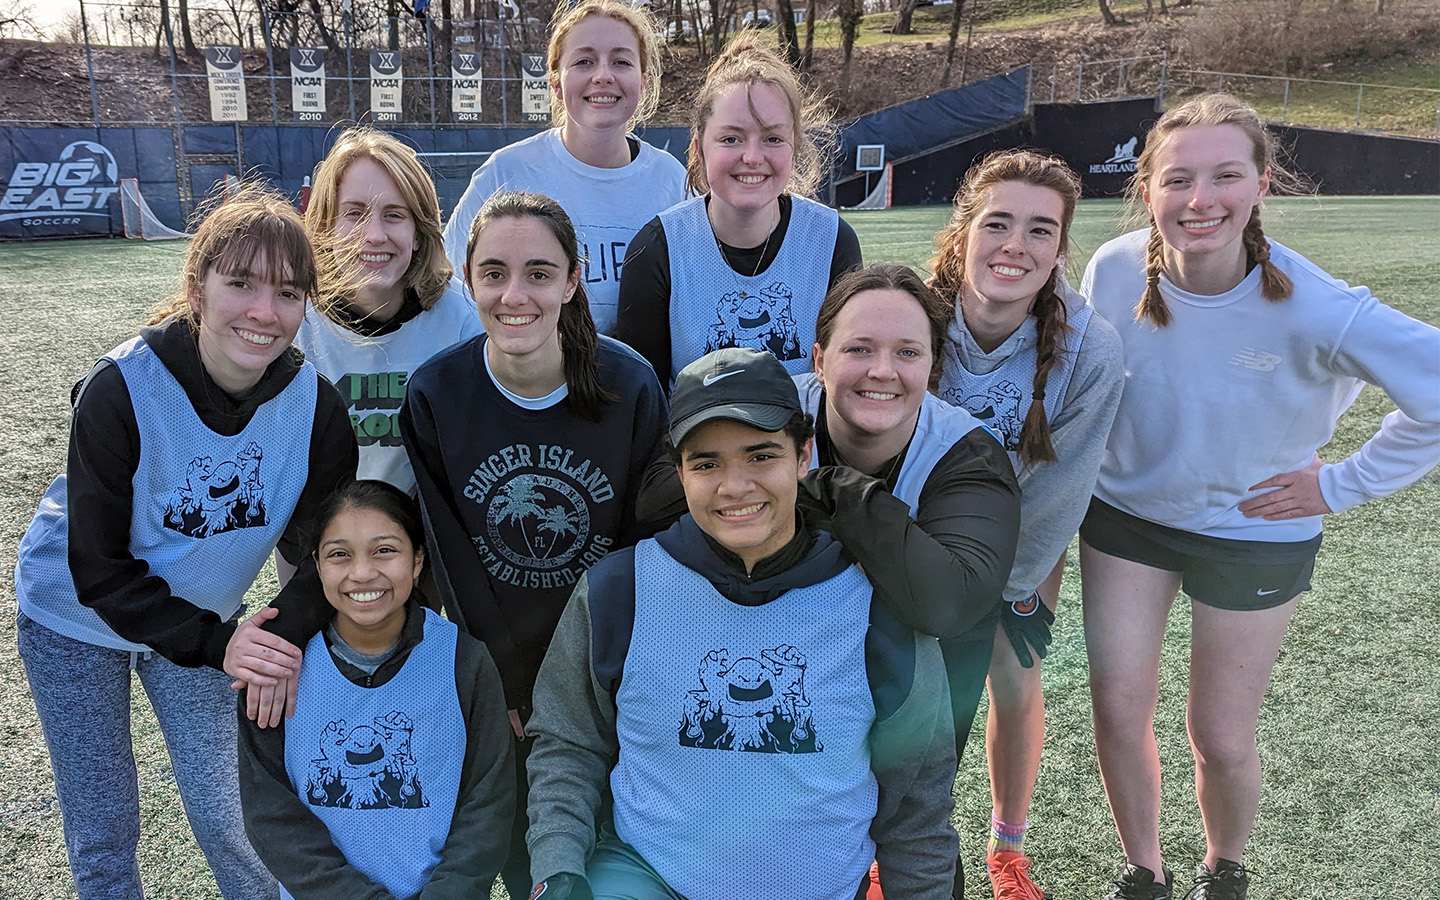 Sydney sits at the center of a team picture of some members of the Women's Ultimate Frisbee team wearing practice pennies on a field